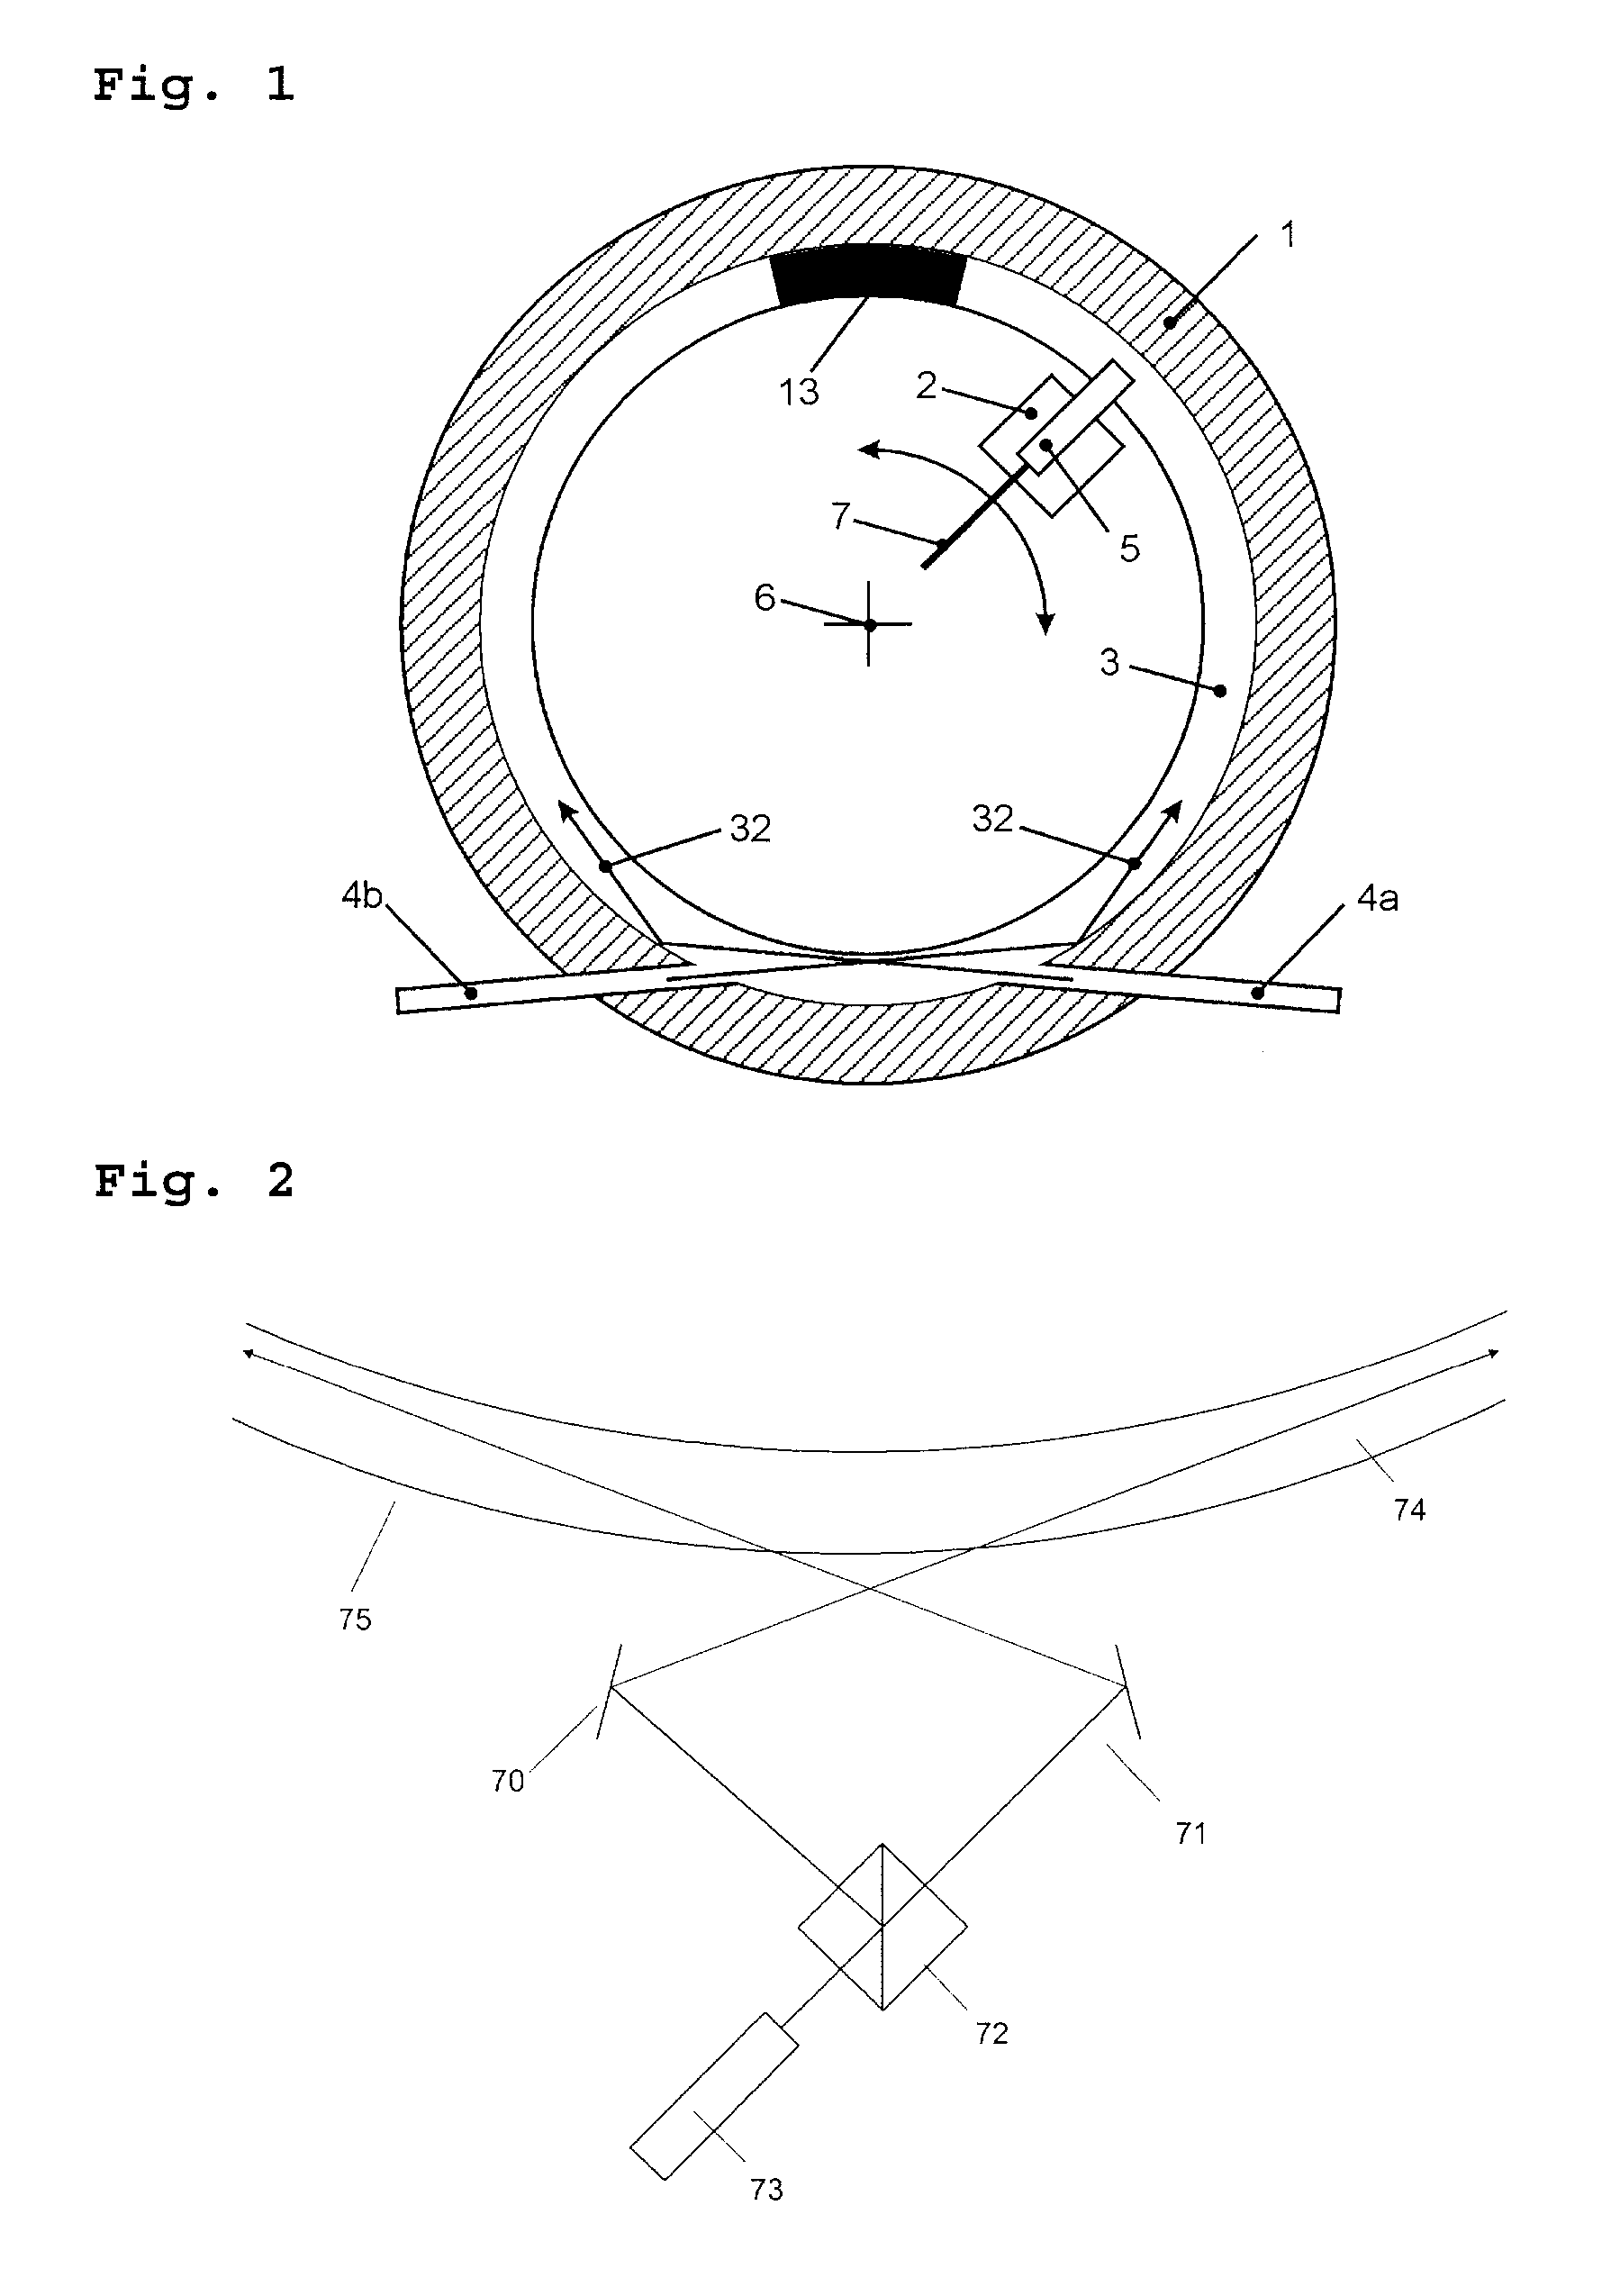 Optical rotating data transmission device with an unobstructed diameter